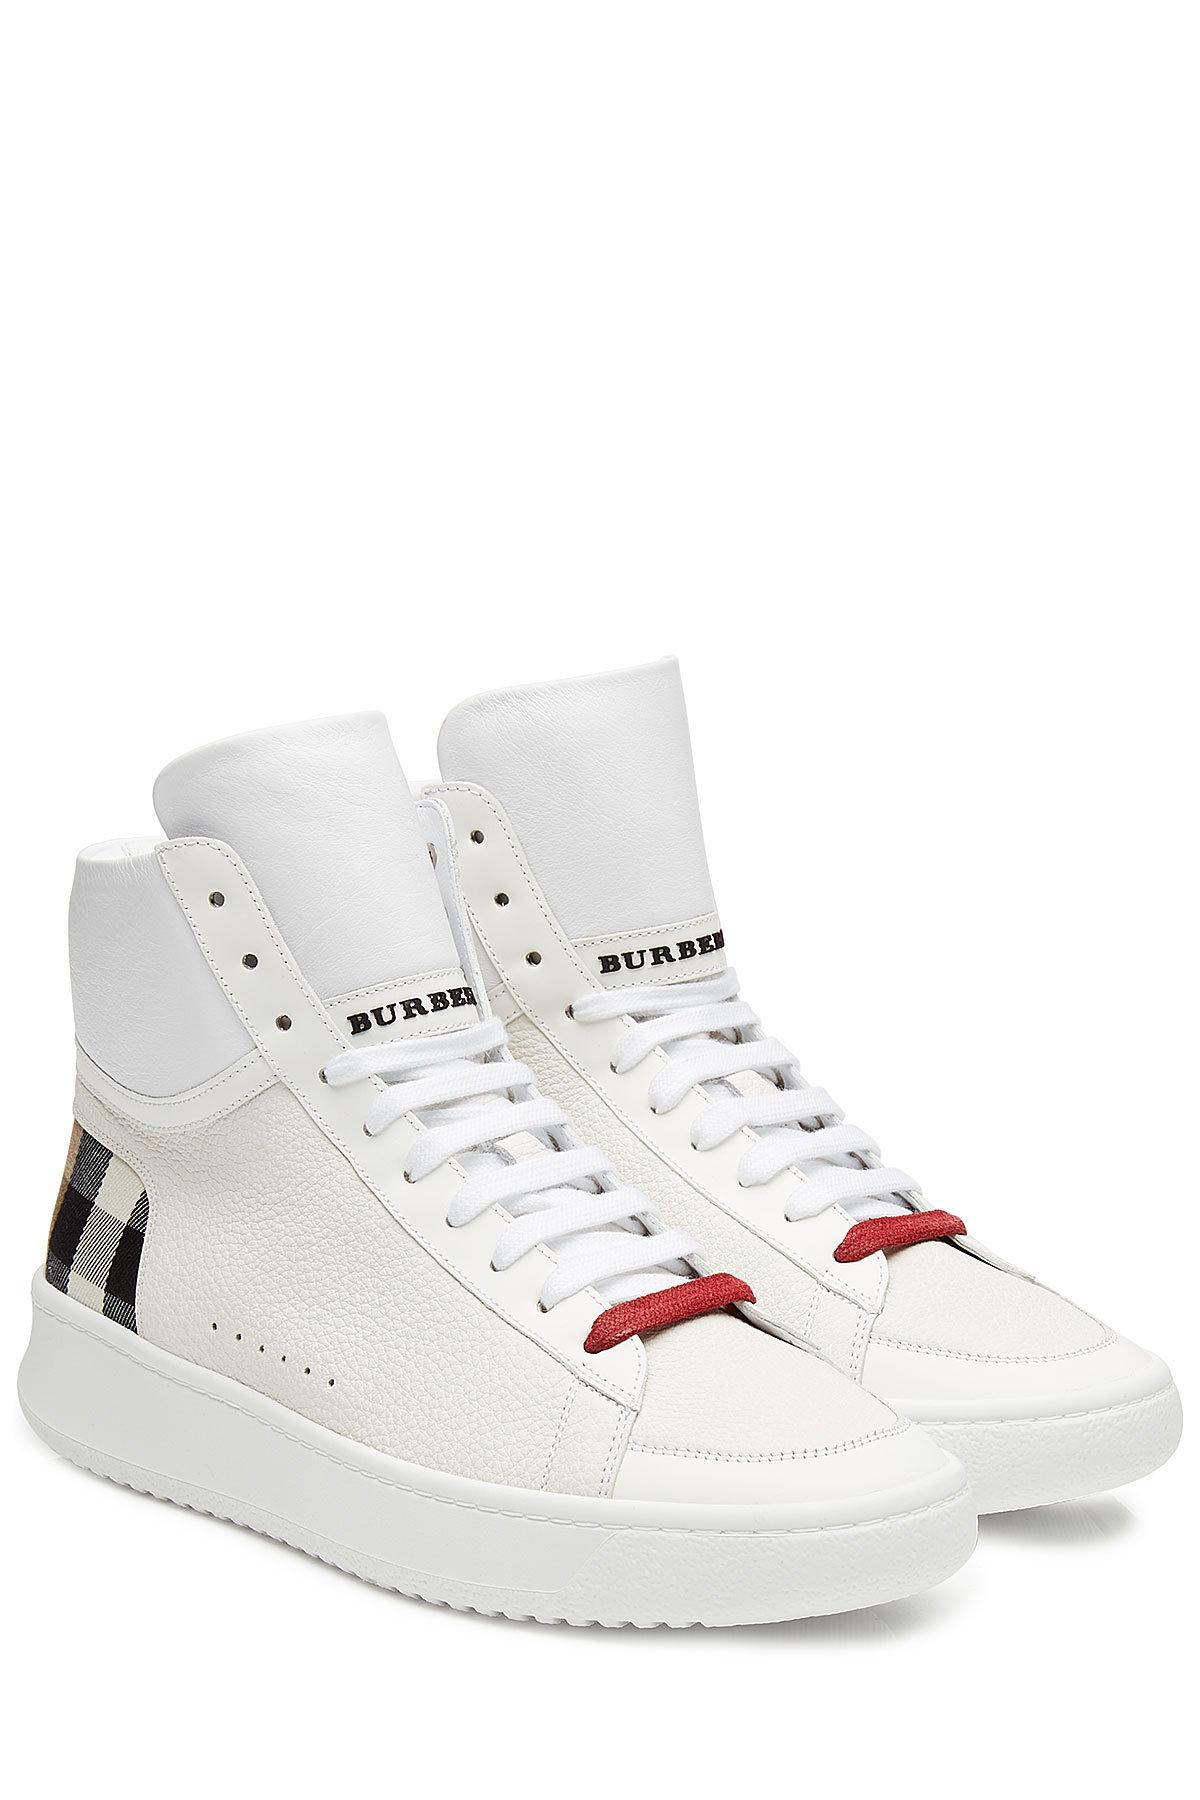 Burberry Leather High Top Sneakers for Men | Lyst1200 x 1800